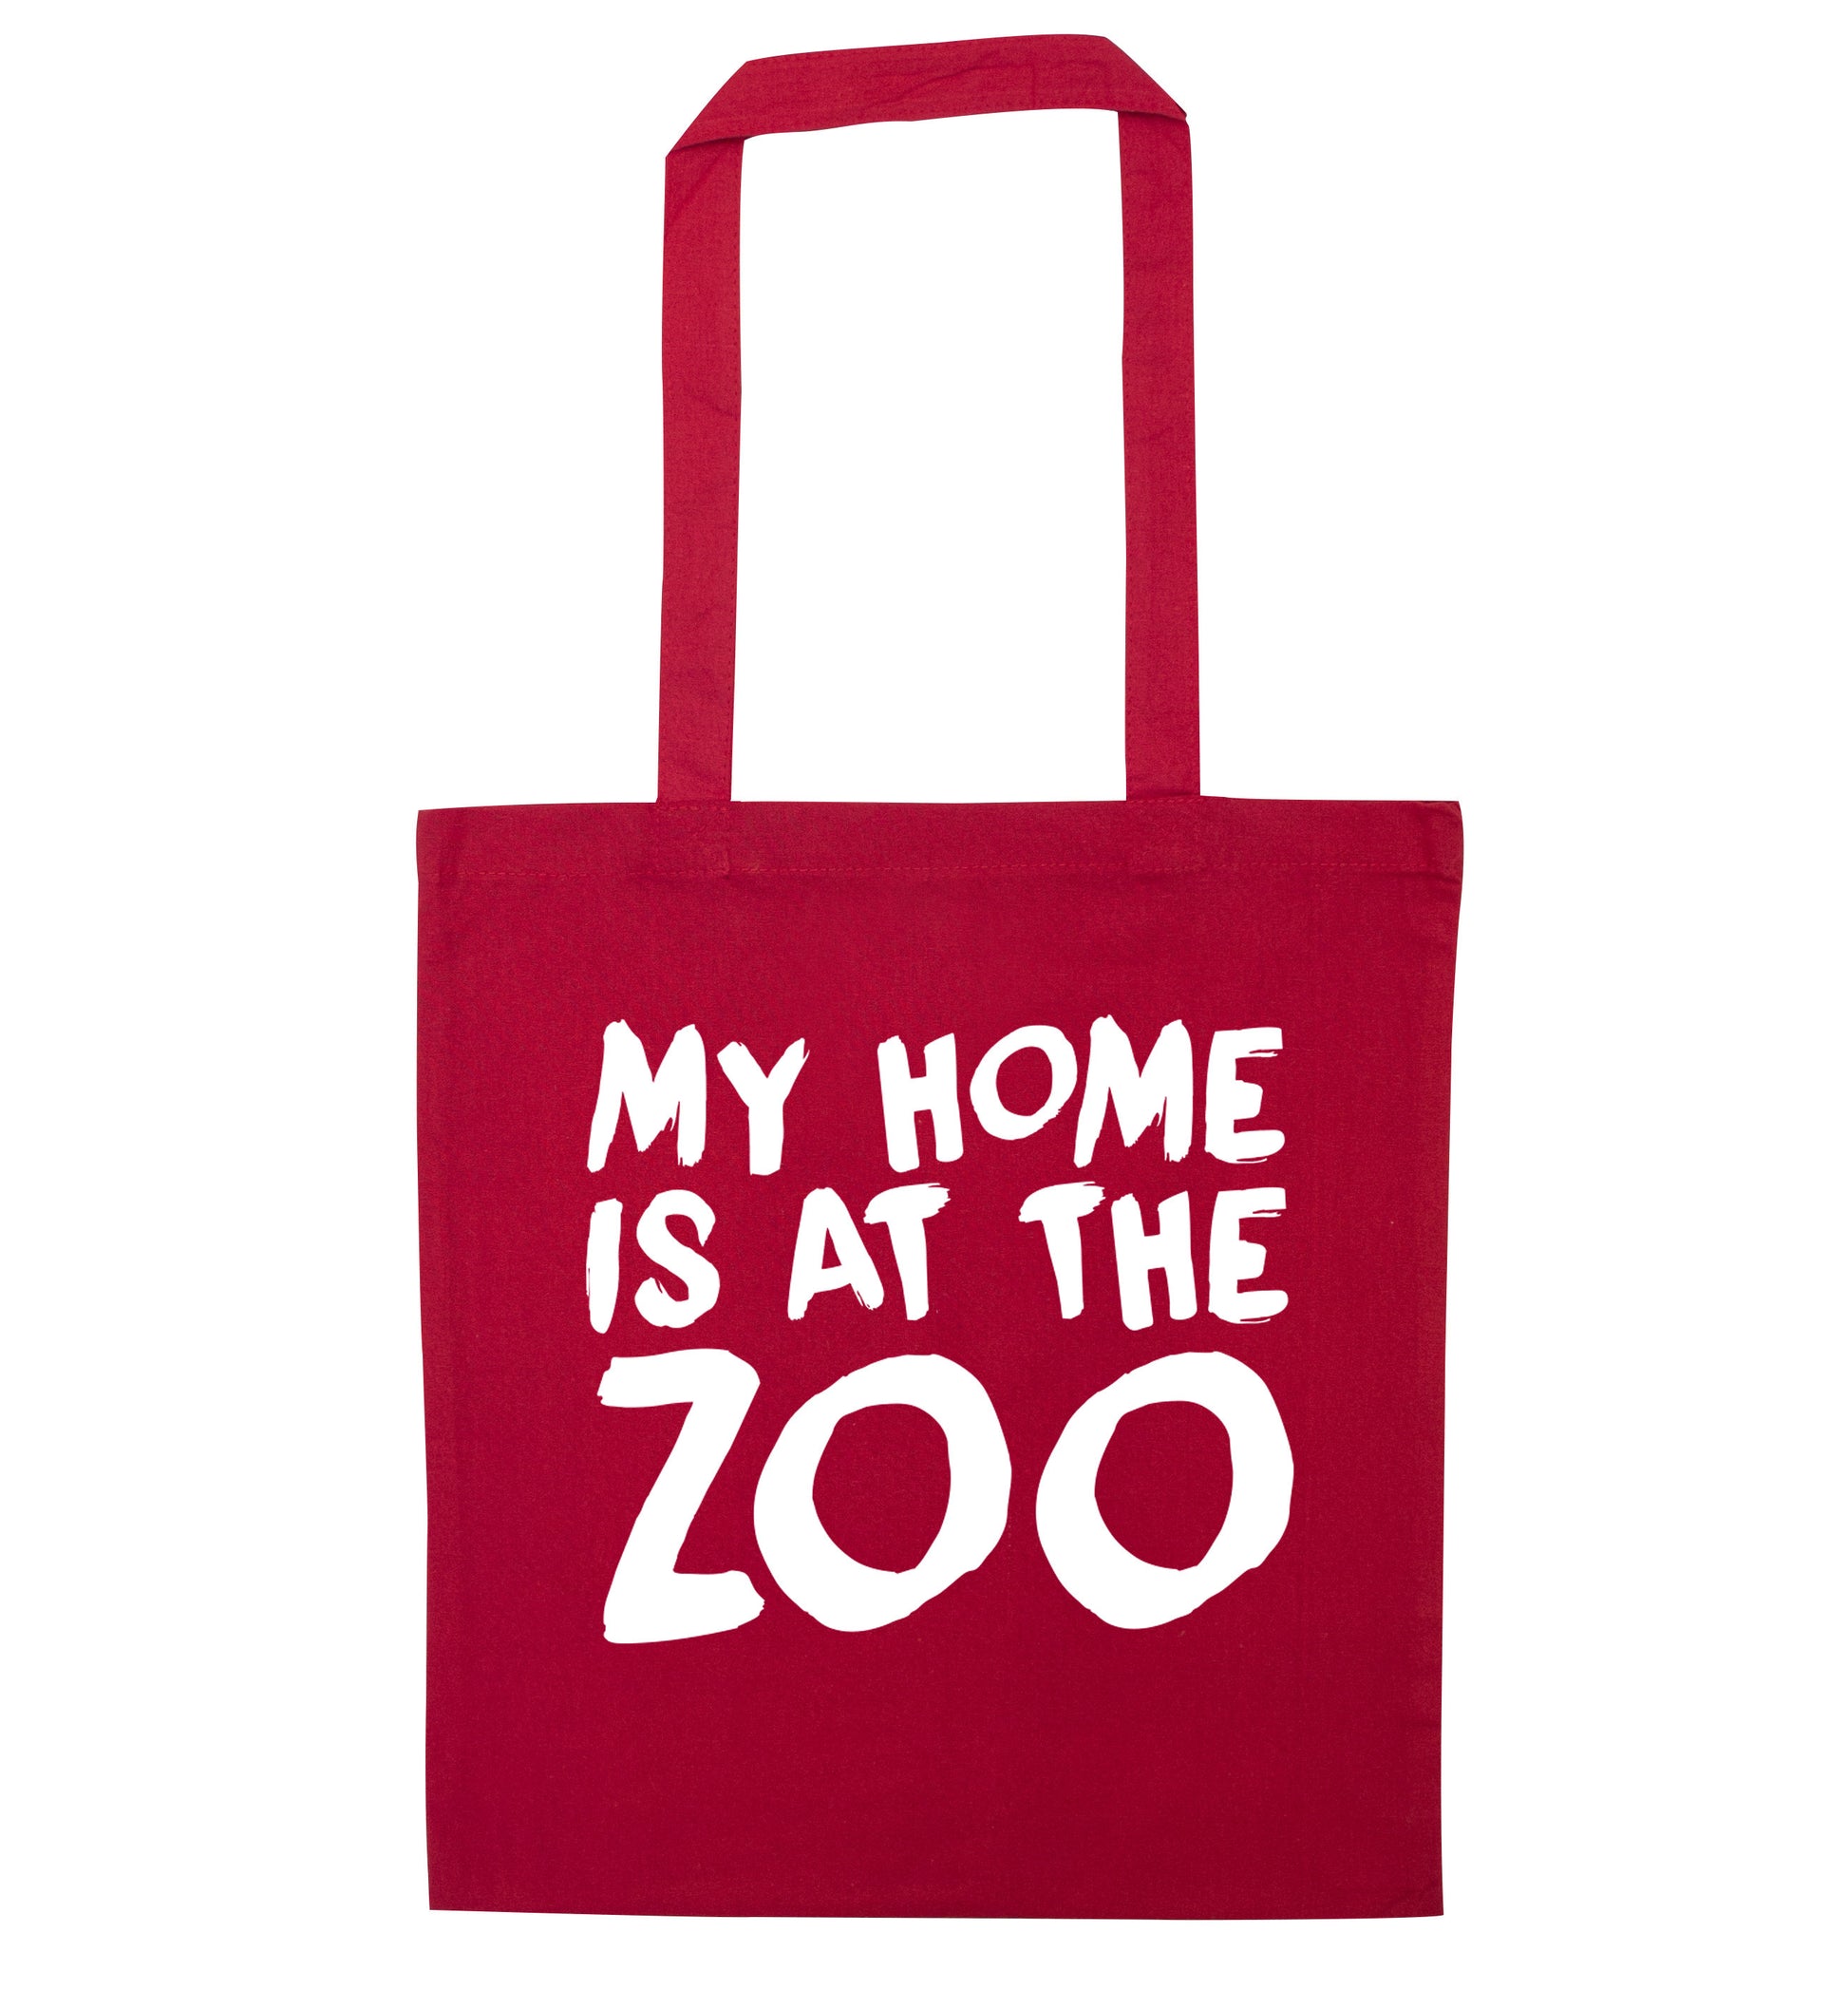 My home is at the zoo red tote bag